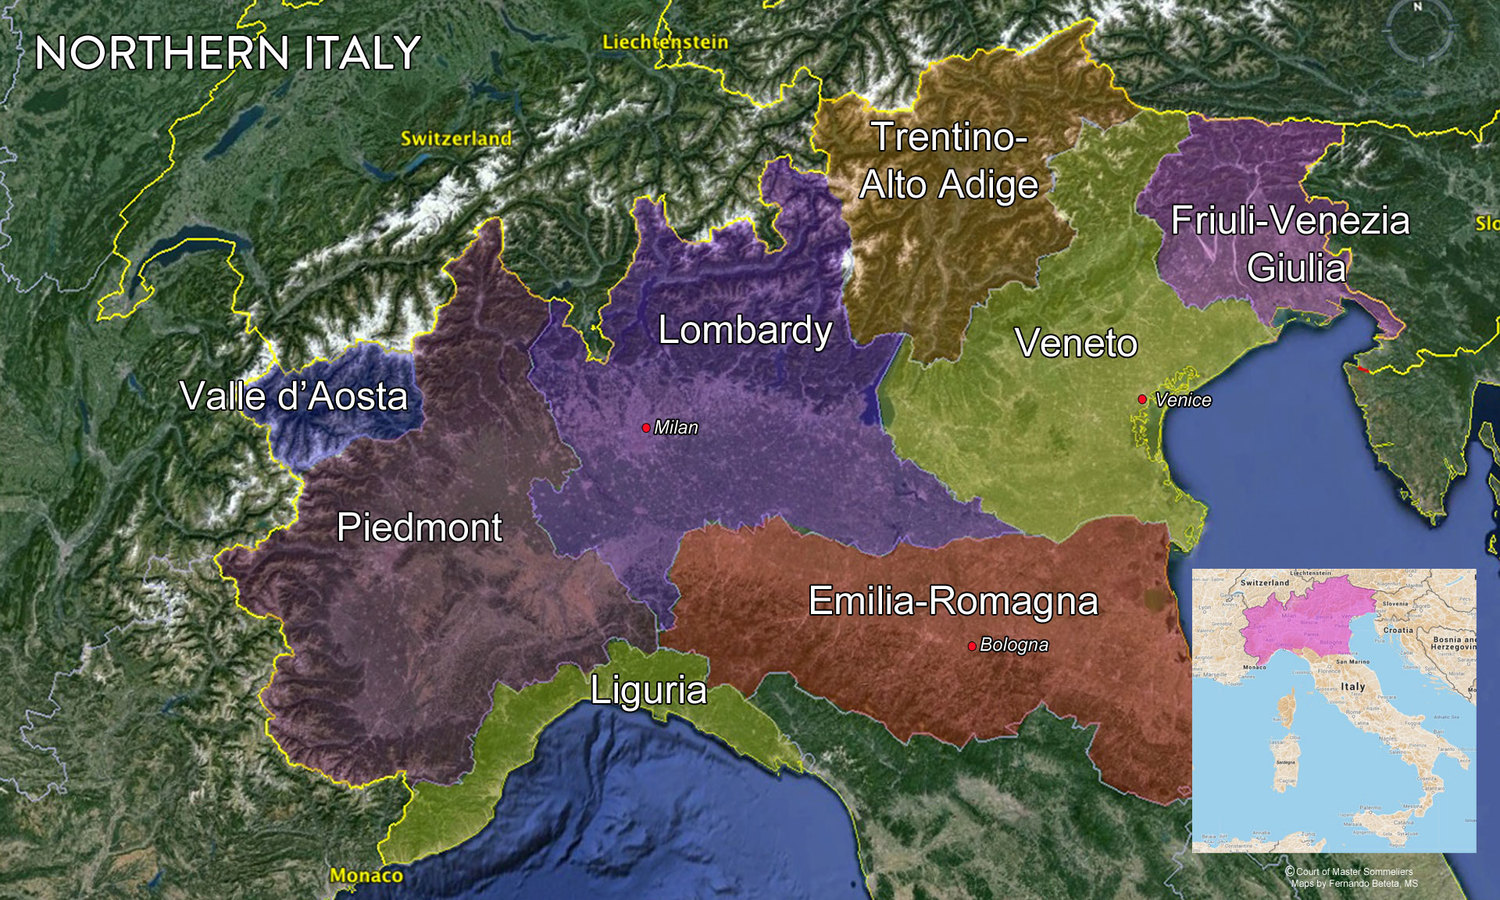 North Italy detailed and color coded regional map 